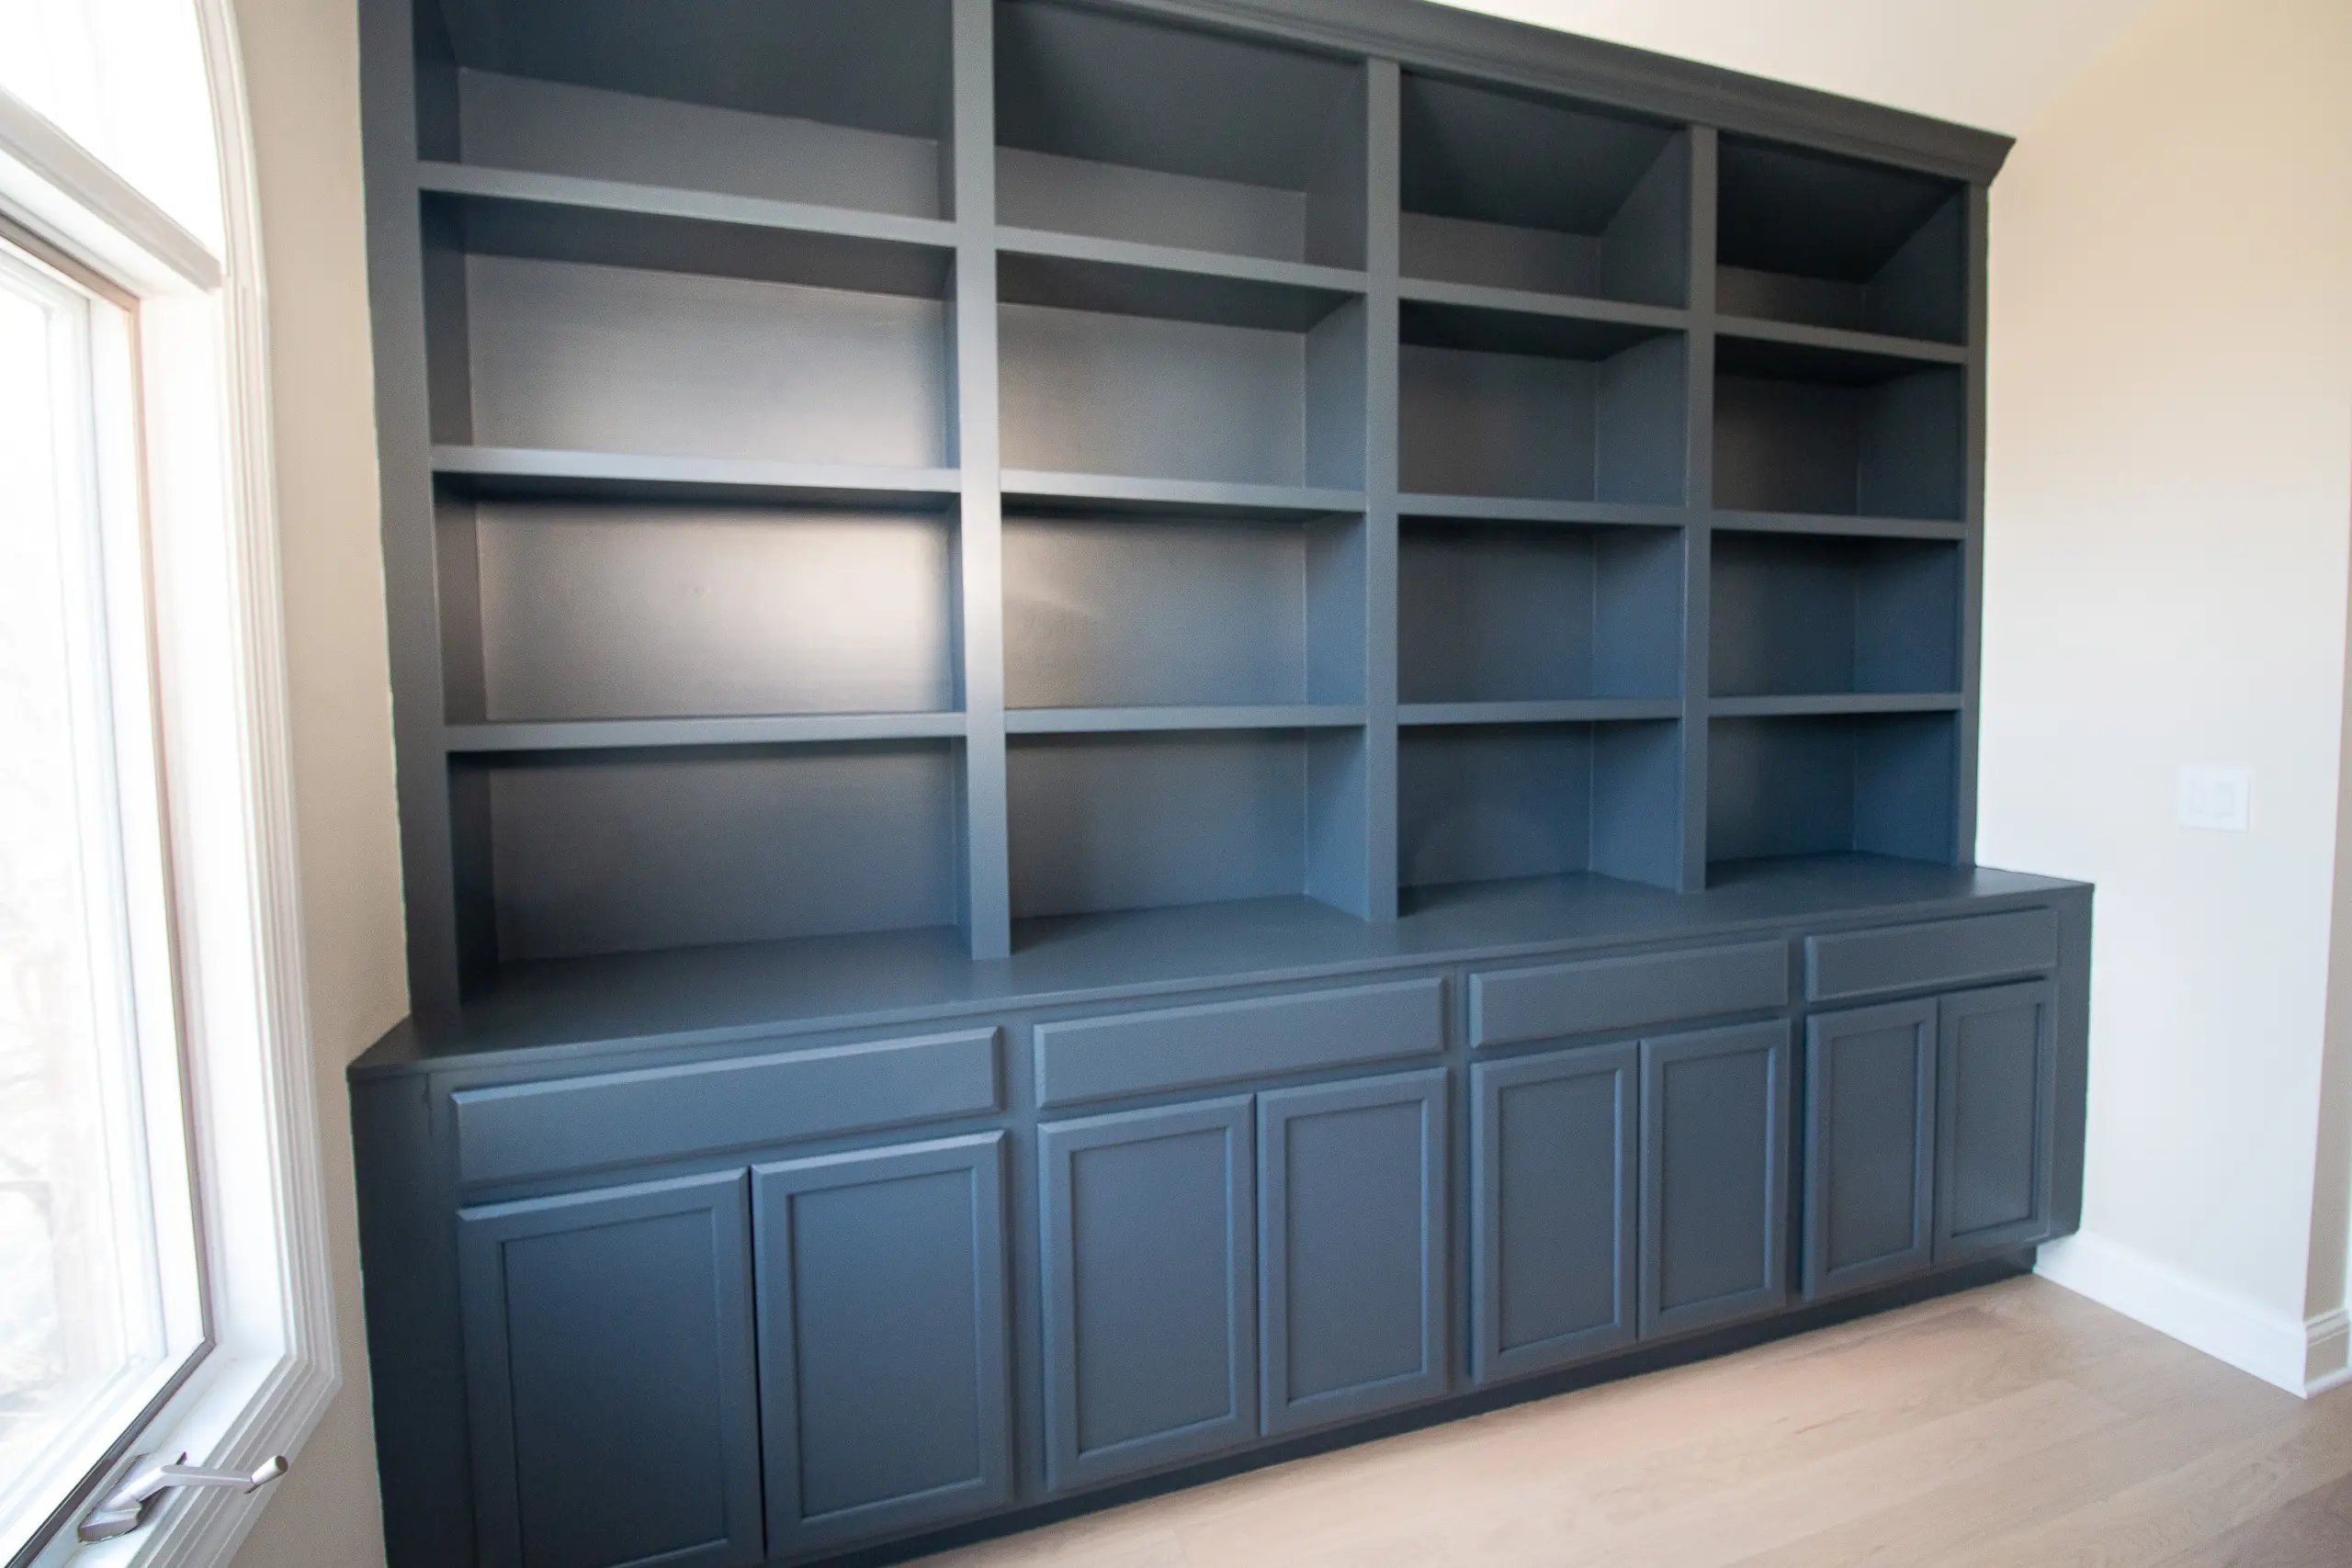 Tips for painting DIY built-ins